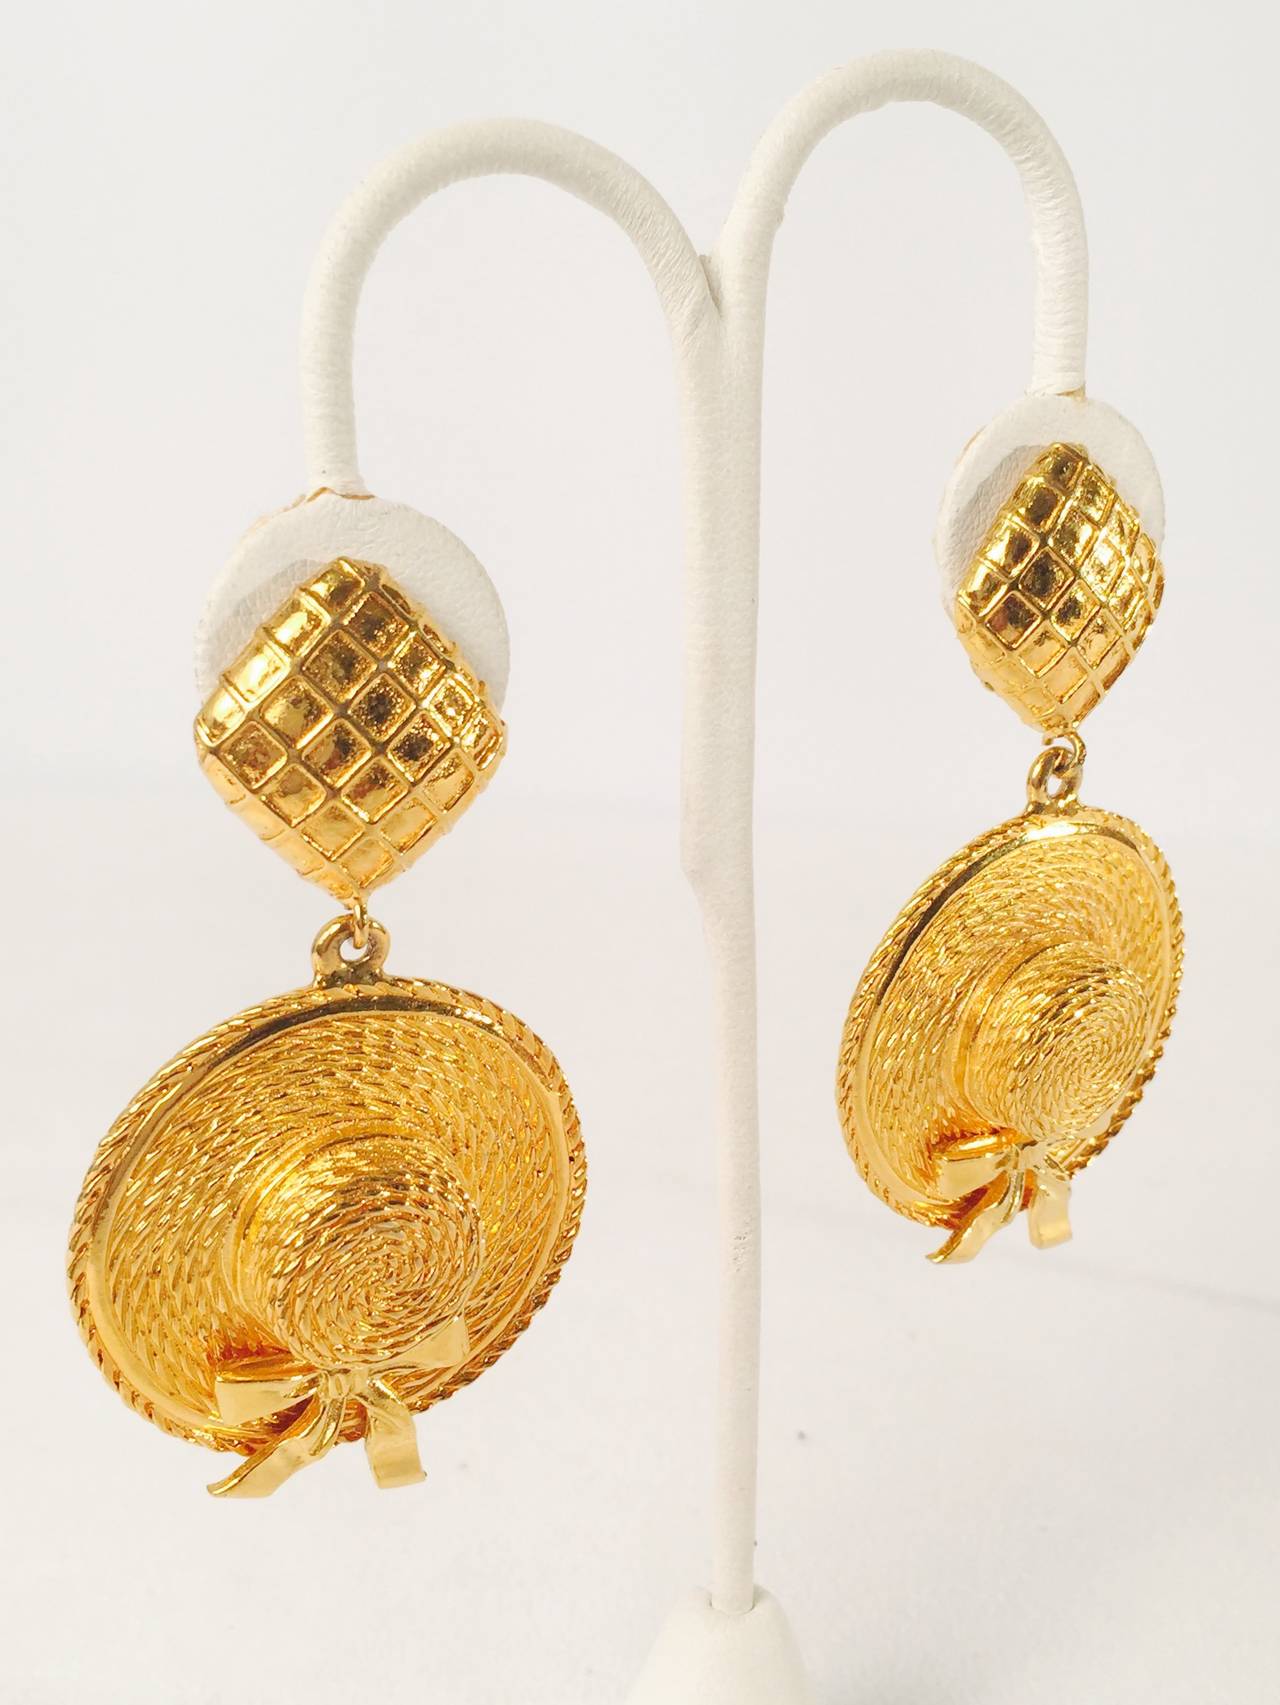 Vintage Chanel Straw Hat Earrings are worthy of Mademoiselle herself!  Clip on earrings feature gold plated straw hats with luxurious bows dangling from waffle weave diamond shapes.  Highly desired by collectors of all things Coco.    Properly